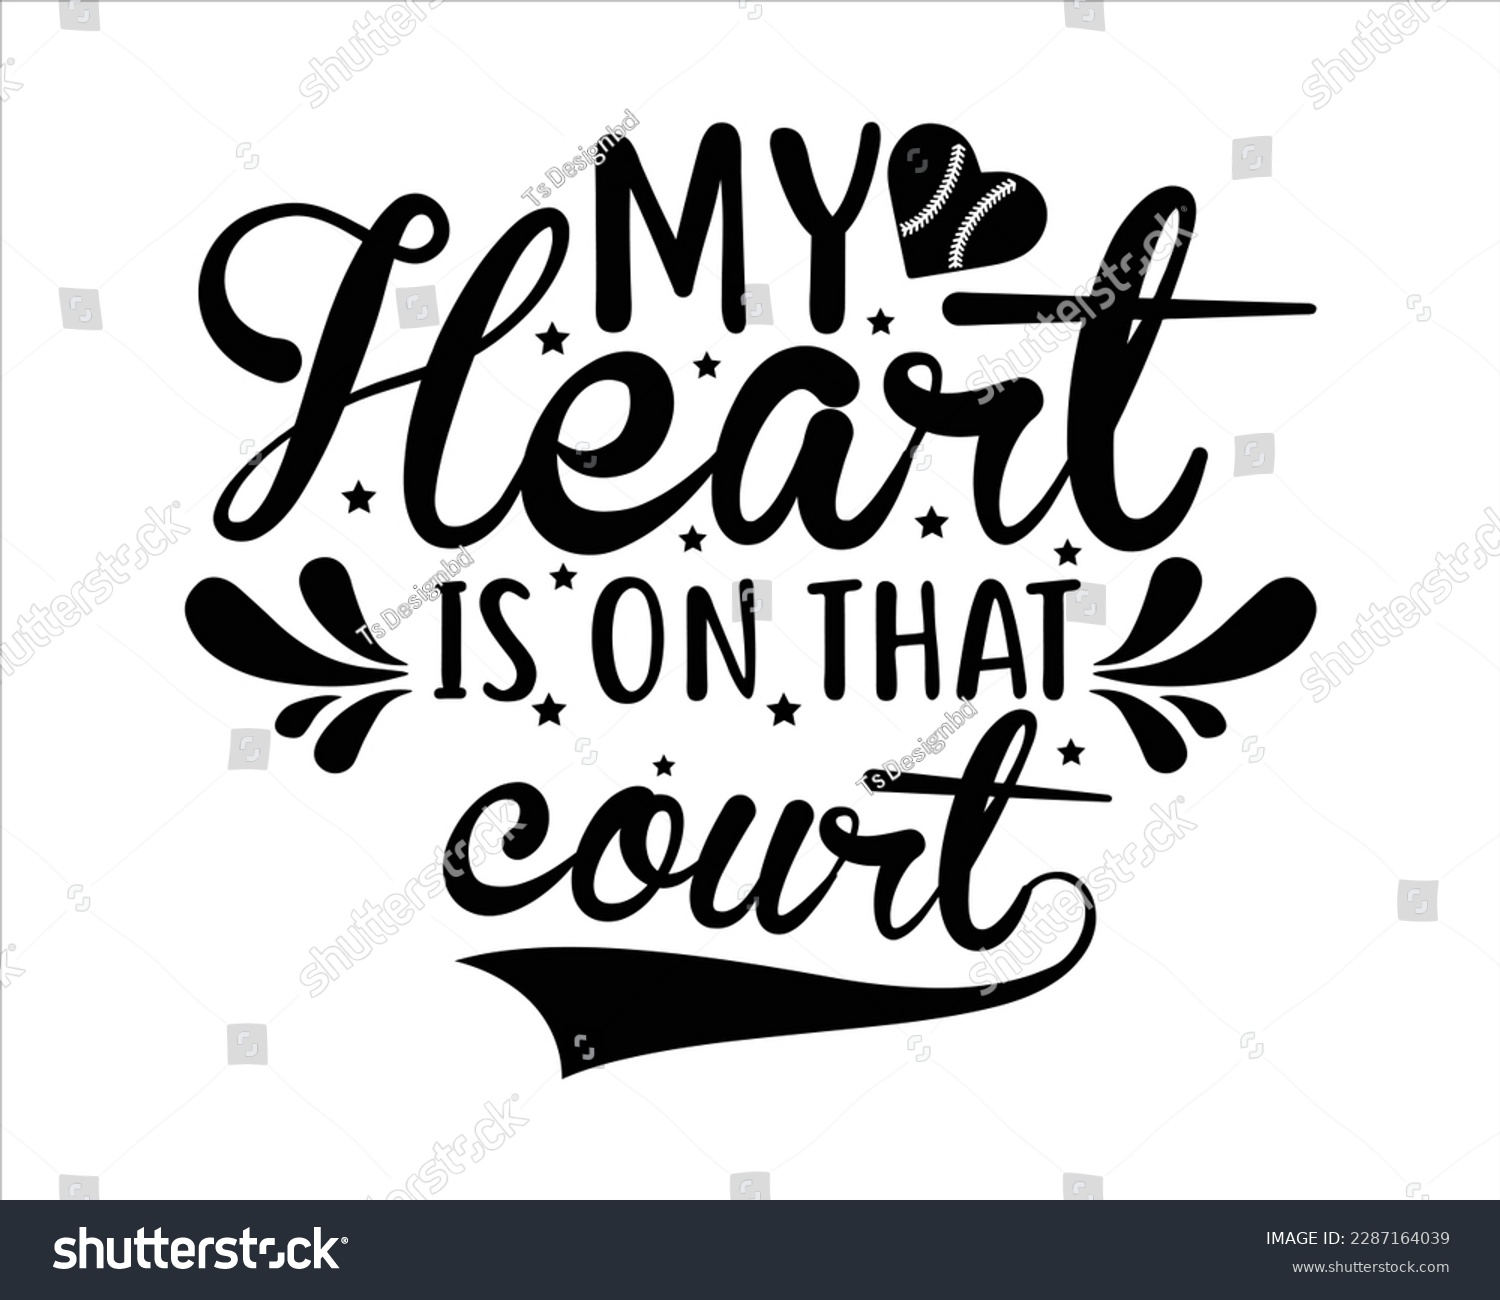 SVG of My Heart Is On that Court Svg Design,Baseball SVG,Baseball Mom SVG Design, Baseball Quote,Baseball Mom Life svg,Baseball Sports svg,baseball t-shirt collection,Supportive Mom svg svg